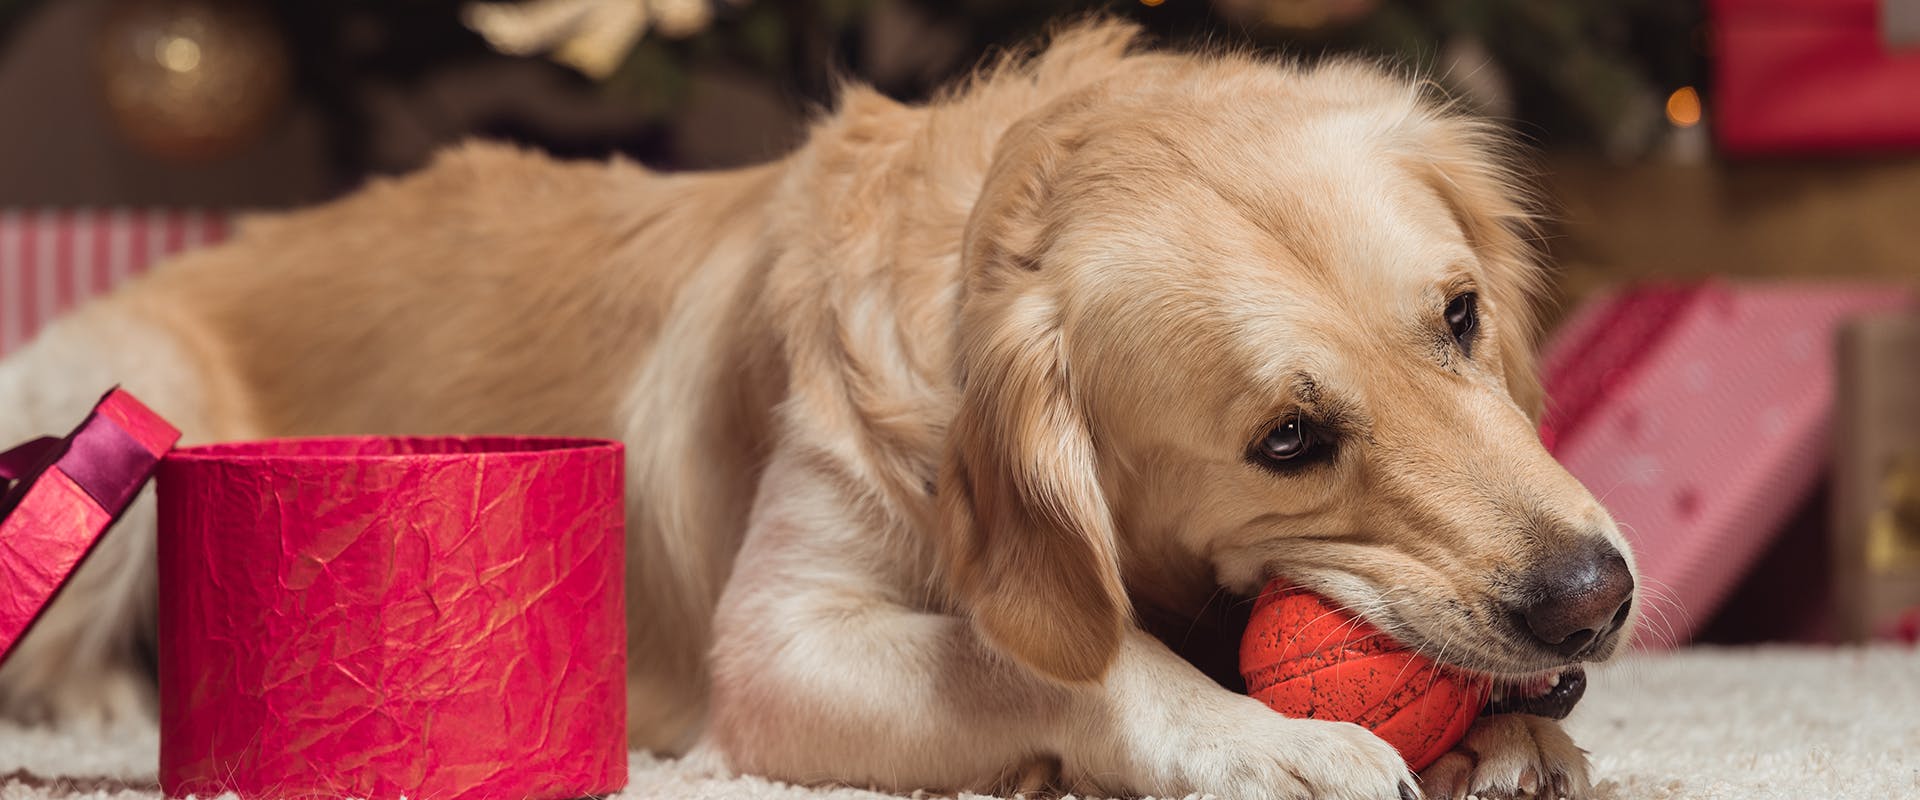 A dog chewing on a red ball, an open red present box to its right